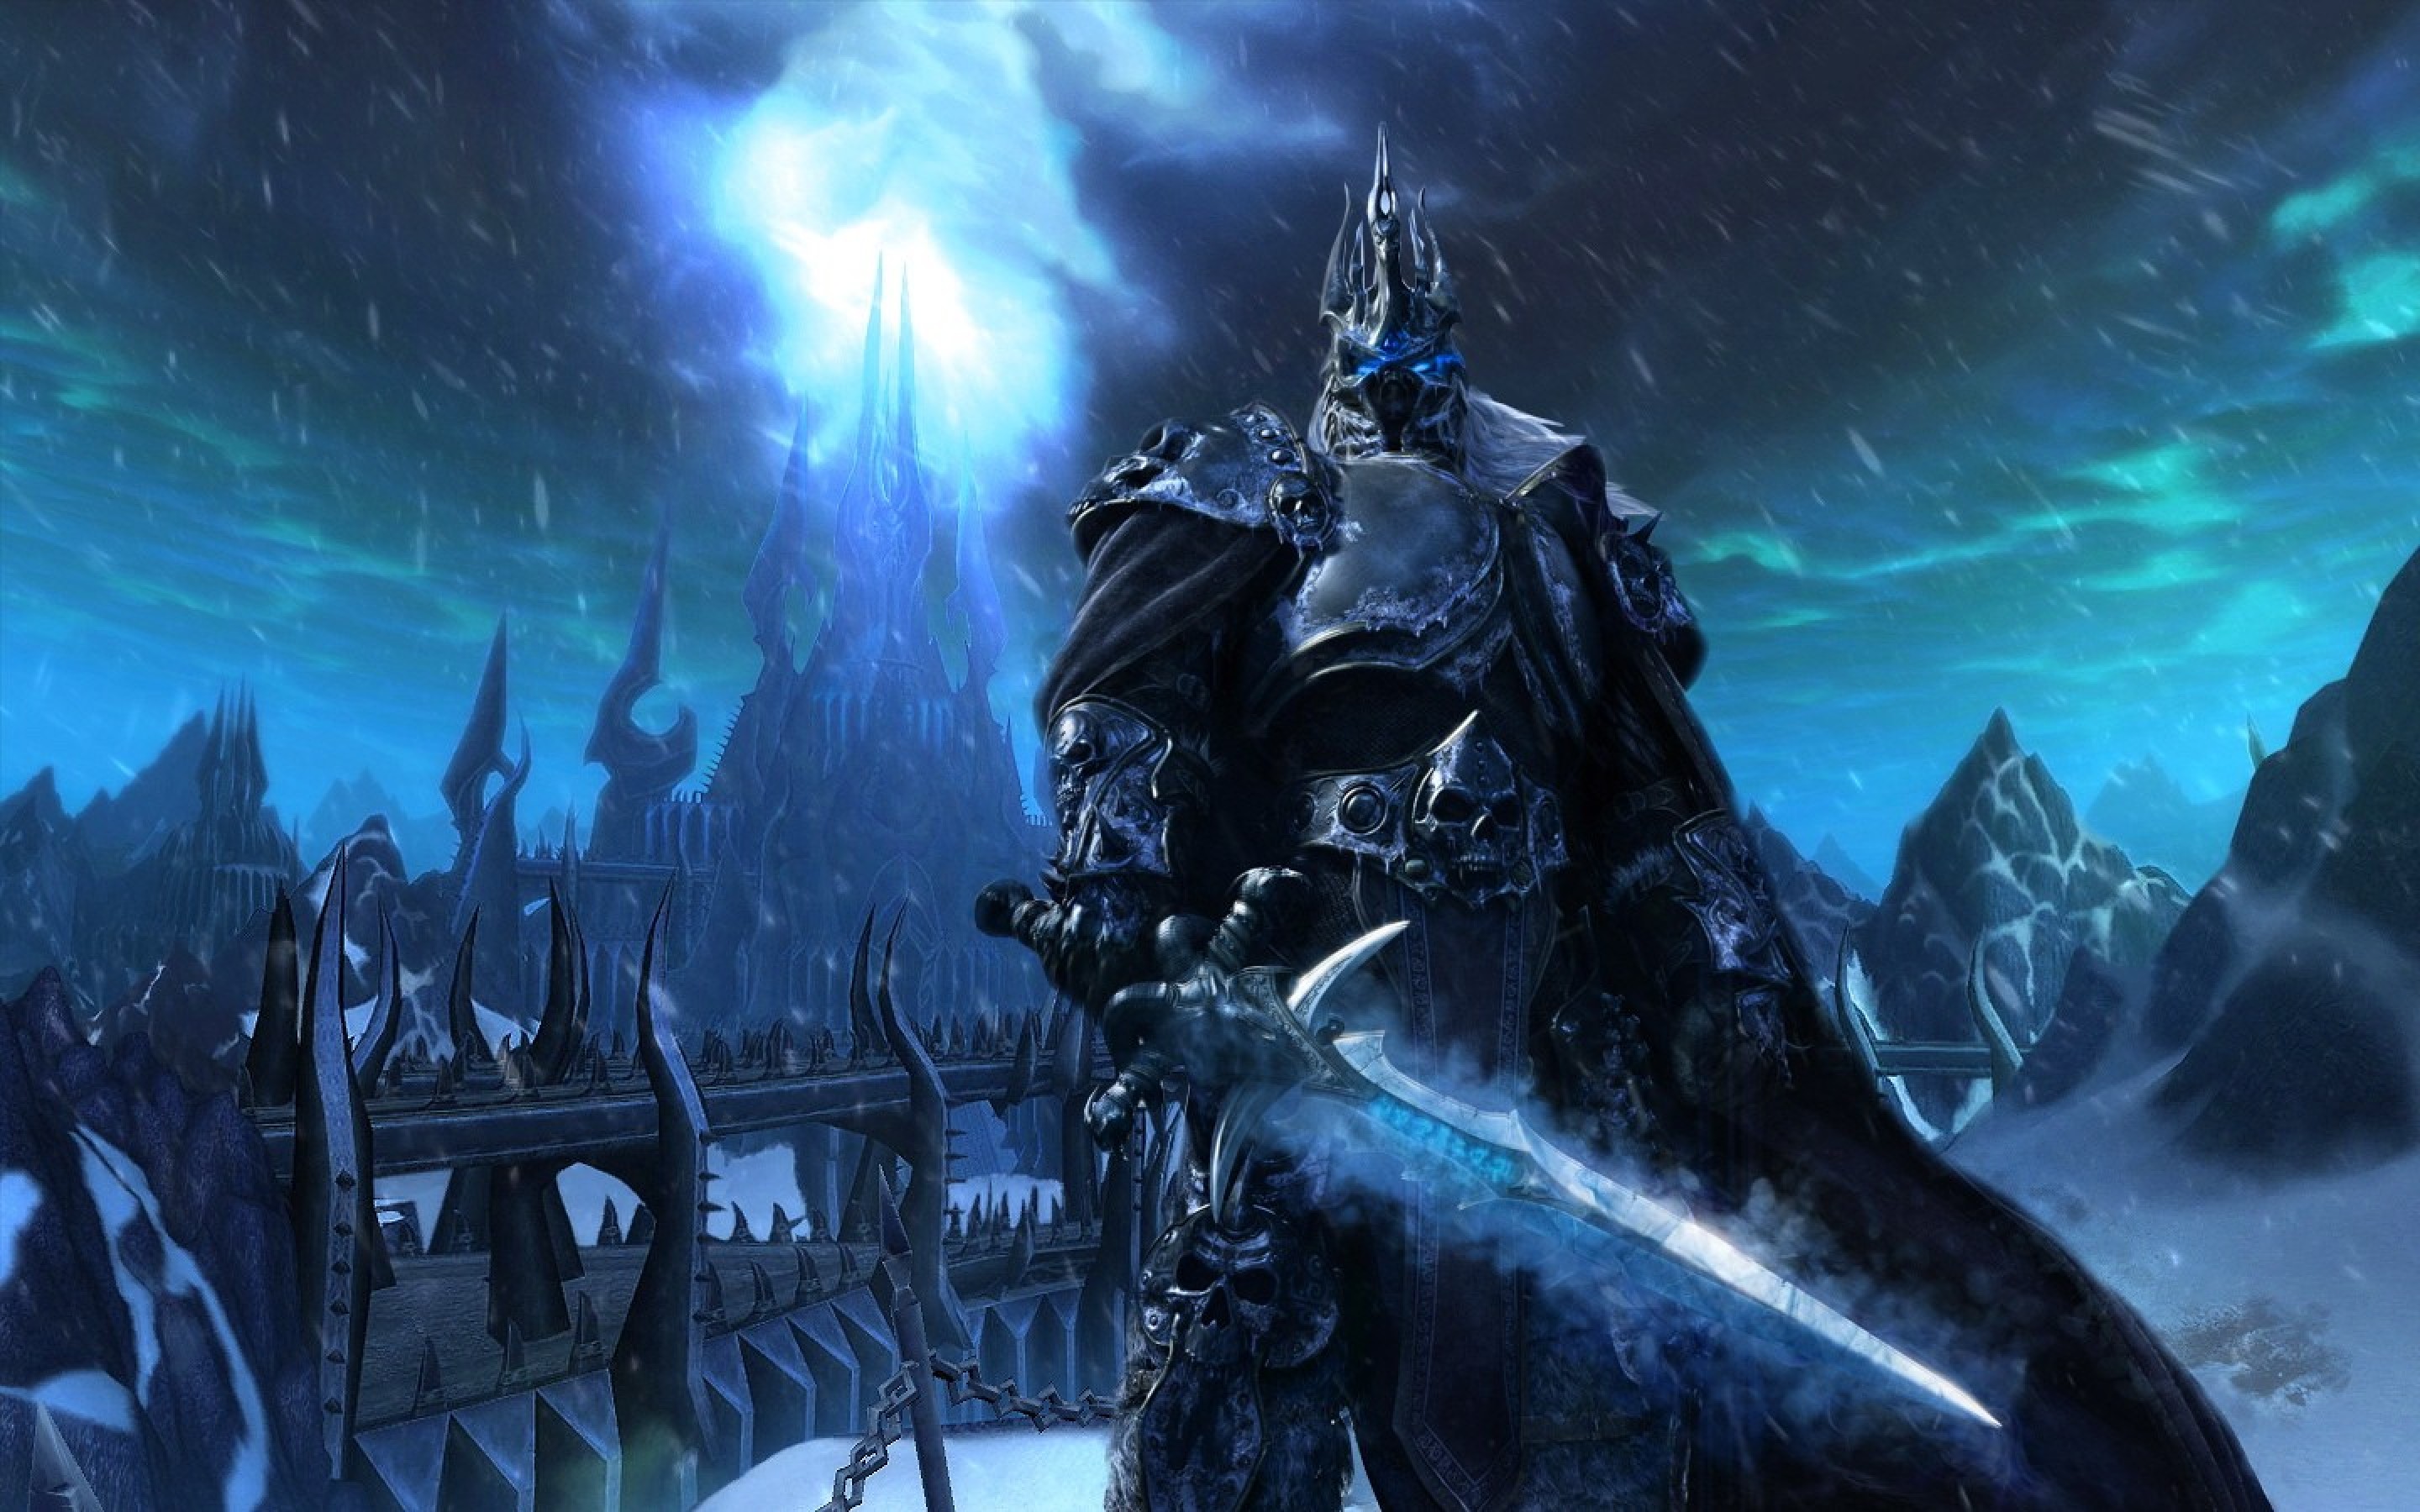 Wotlk 3.3 5. World of Warcraft Wrath of the lich King. Король Лич варкрафт. Артас Лич Кинг. Варкрафт 3 Король Лич.